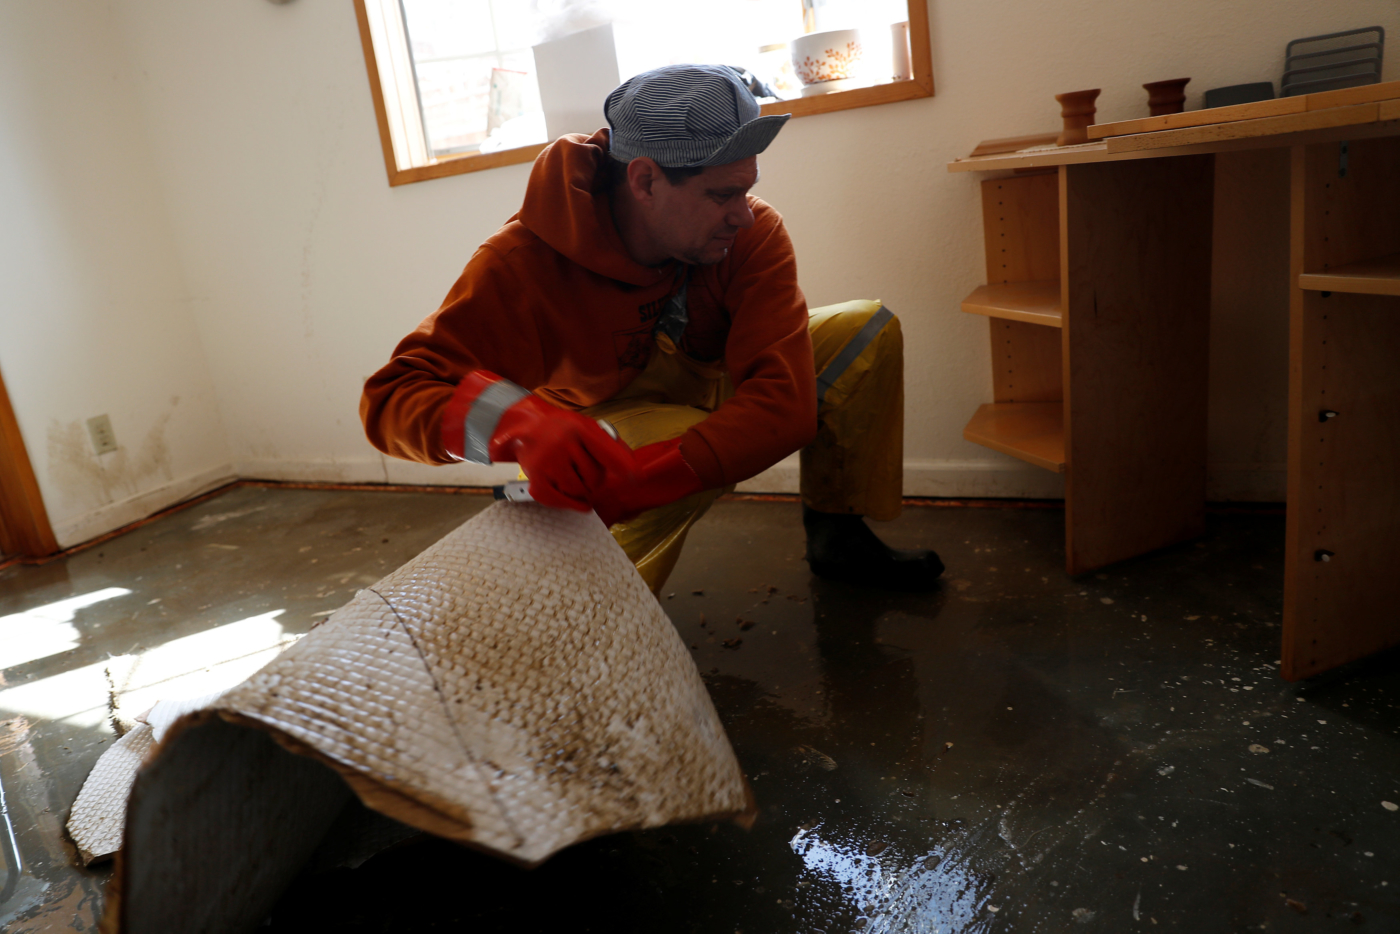 Wil Henninger cuts a carpet soaked in flood water inside the home of neighbor Judy Georges after an overflowed Coyote Creek flooded neighborhoods and prompted an evacuation in San Jose, California, U.S., February 22, 2017. REUTERS/Stephen Lam